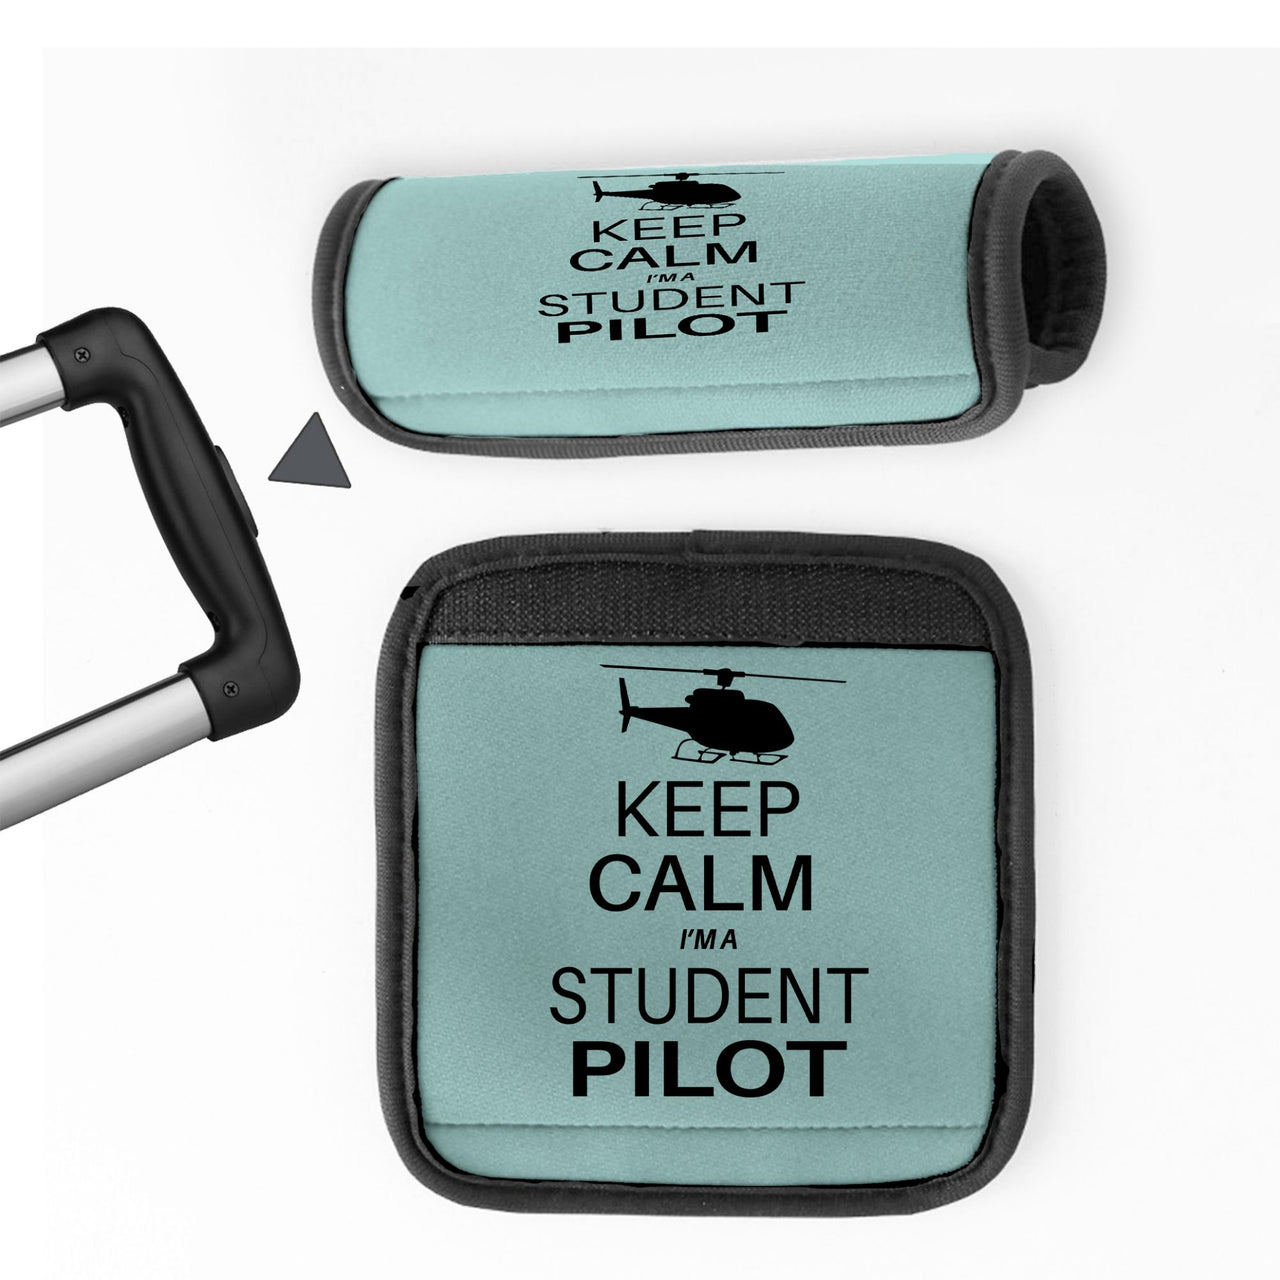 Student Pilot (Helicopter) Designed Neoprene Luggage Handle Covers